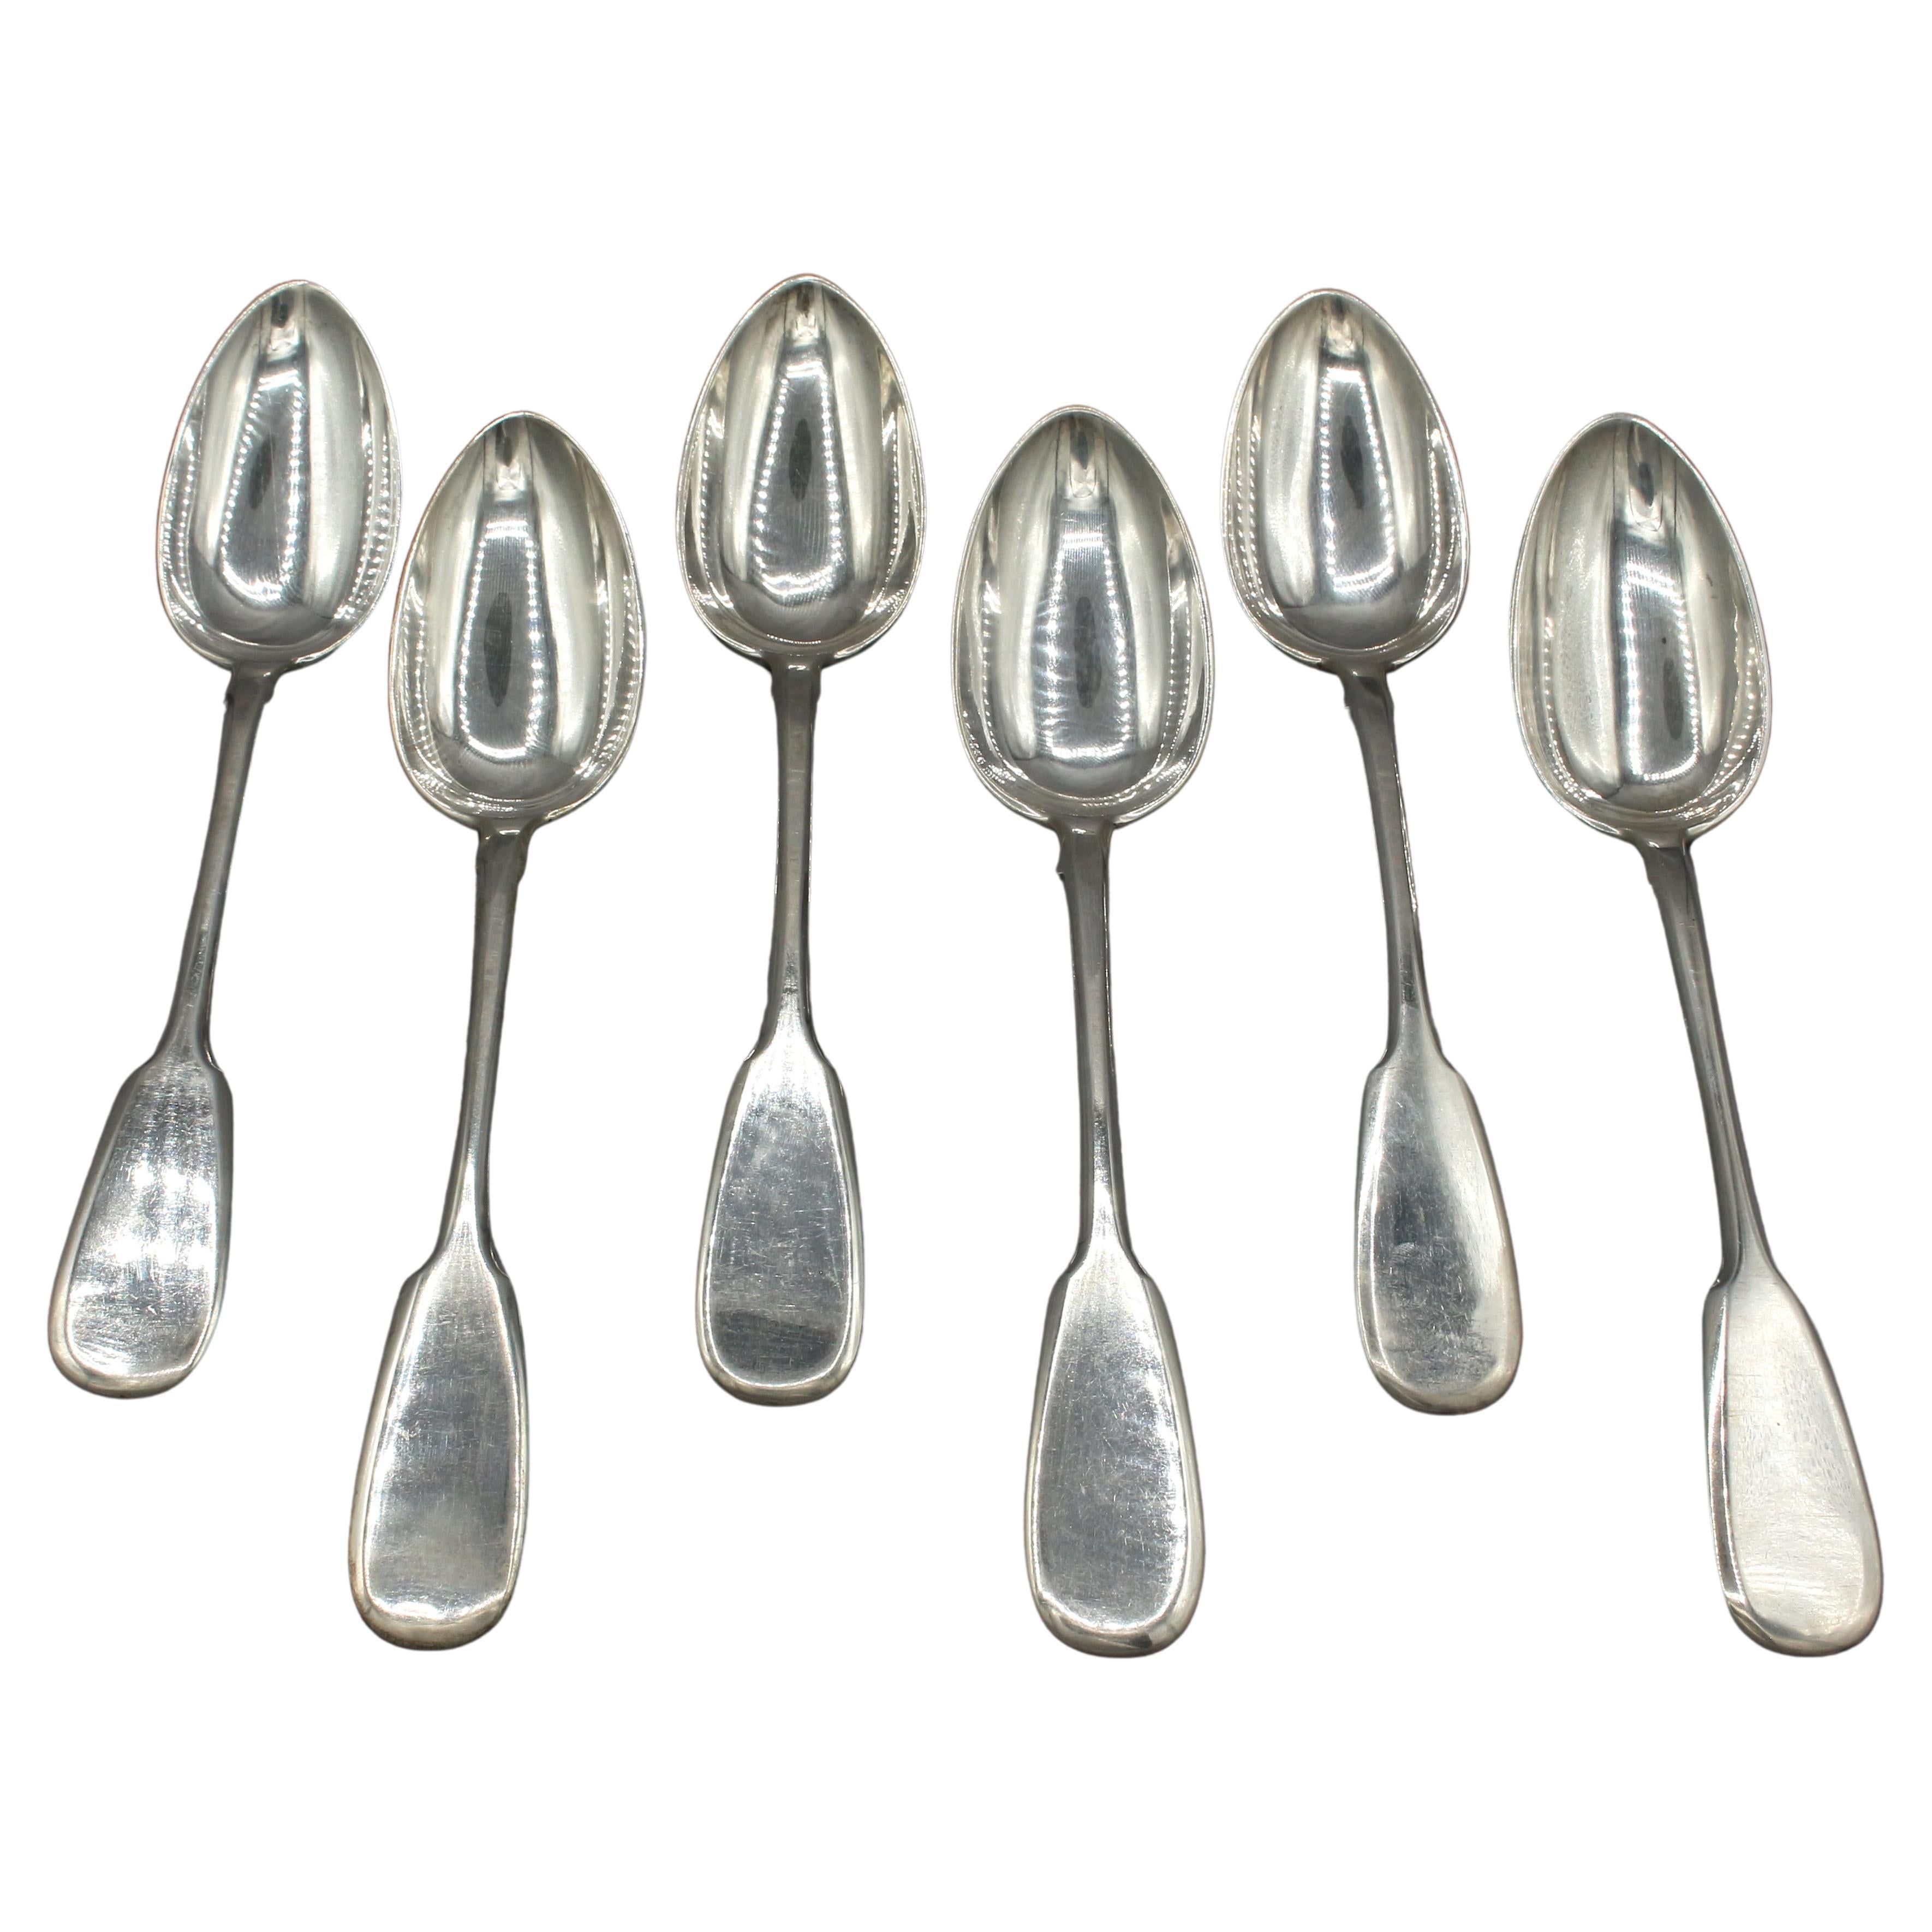 Set of 6 Faberge 84 Zolotniks (.875) Standard Silver Tablespoons, circa 1880